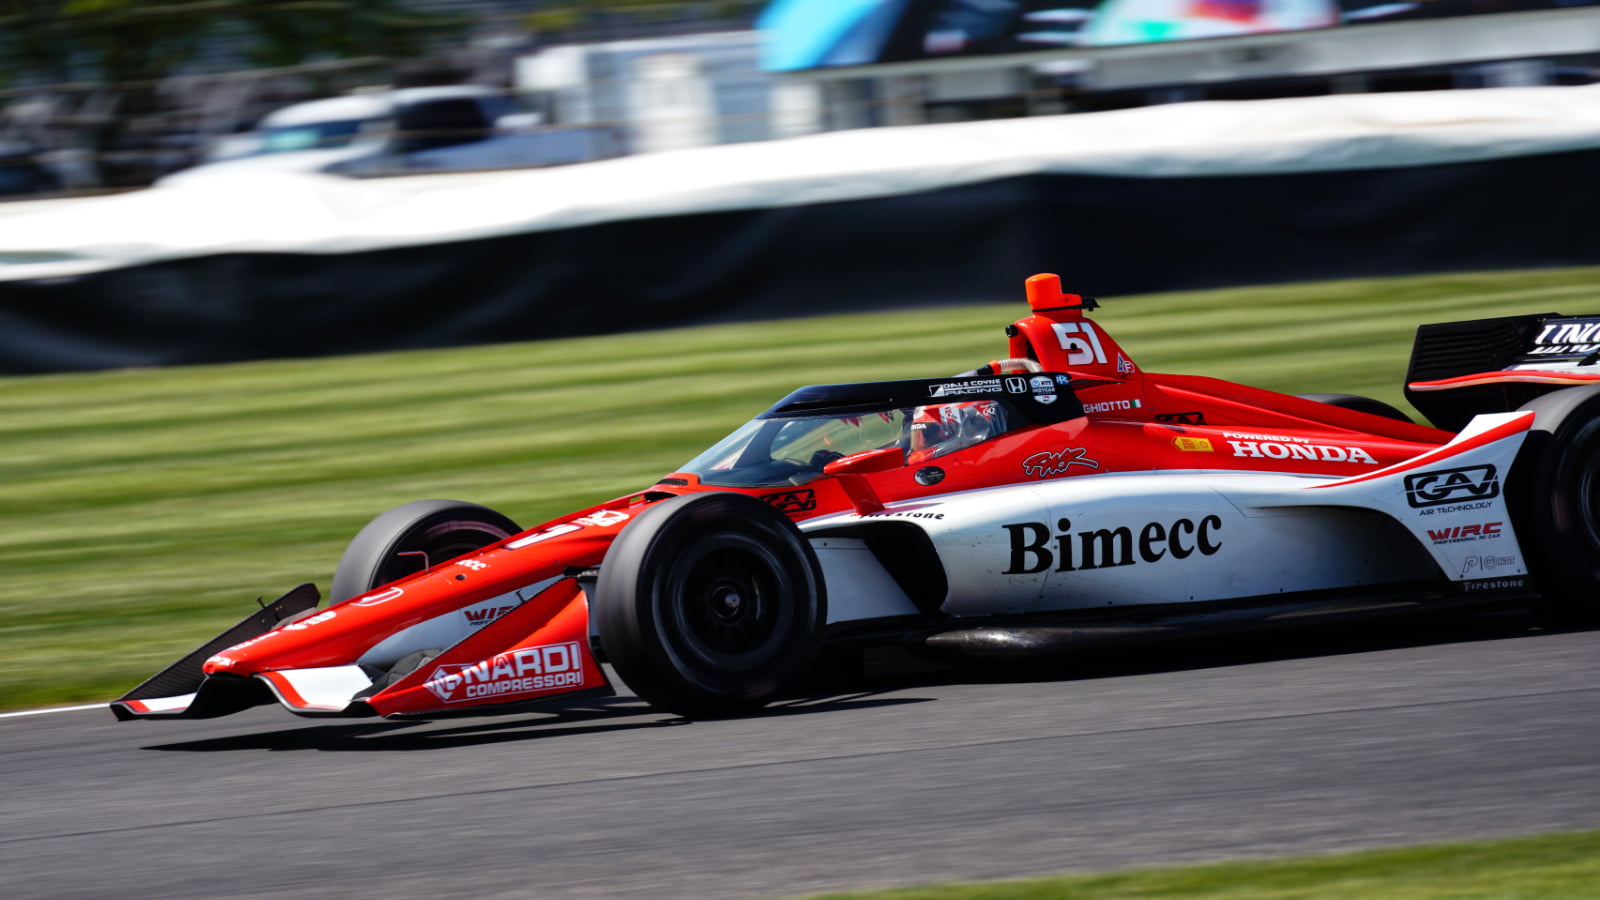 Vautier Revs Up for Action at the IndyCar Detroit Grand Prix with Dale Coyne Racing